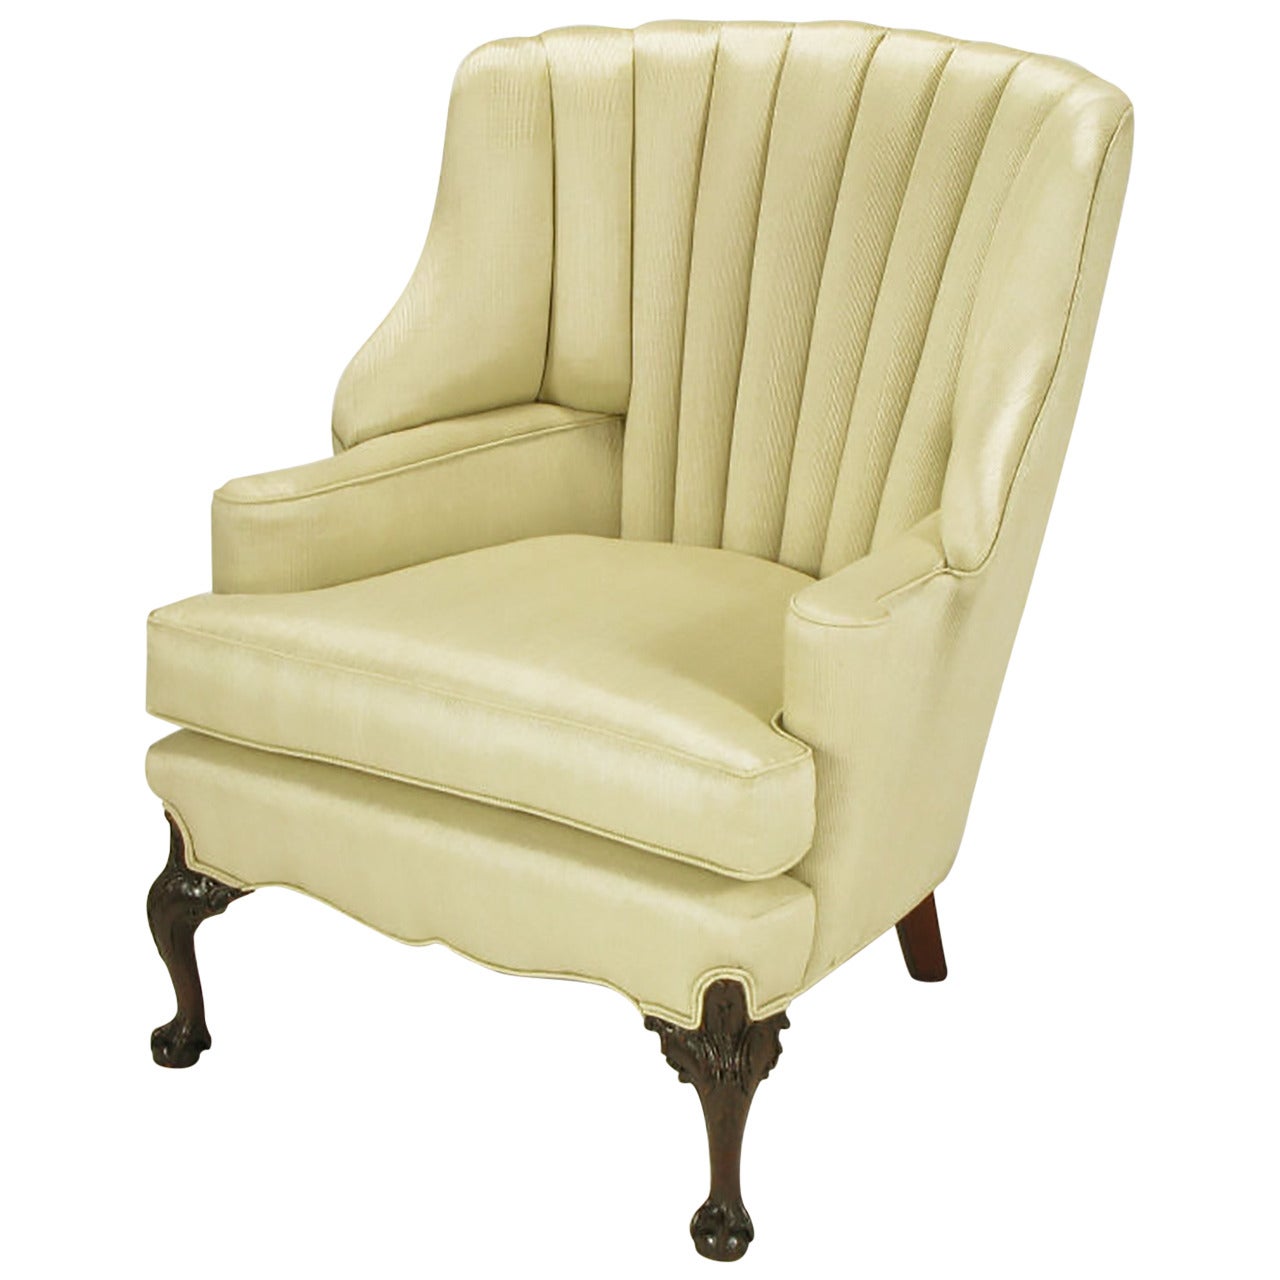 1930s Channel Back Claw Foot Georgian Wingback Chair For Sale